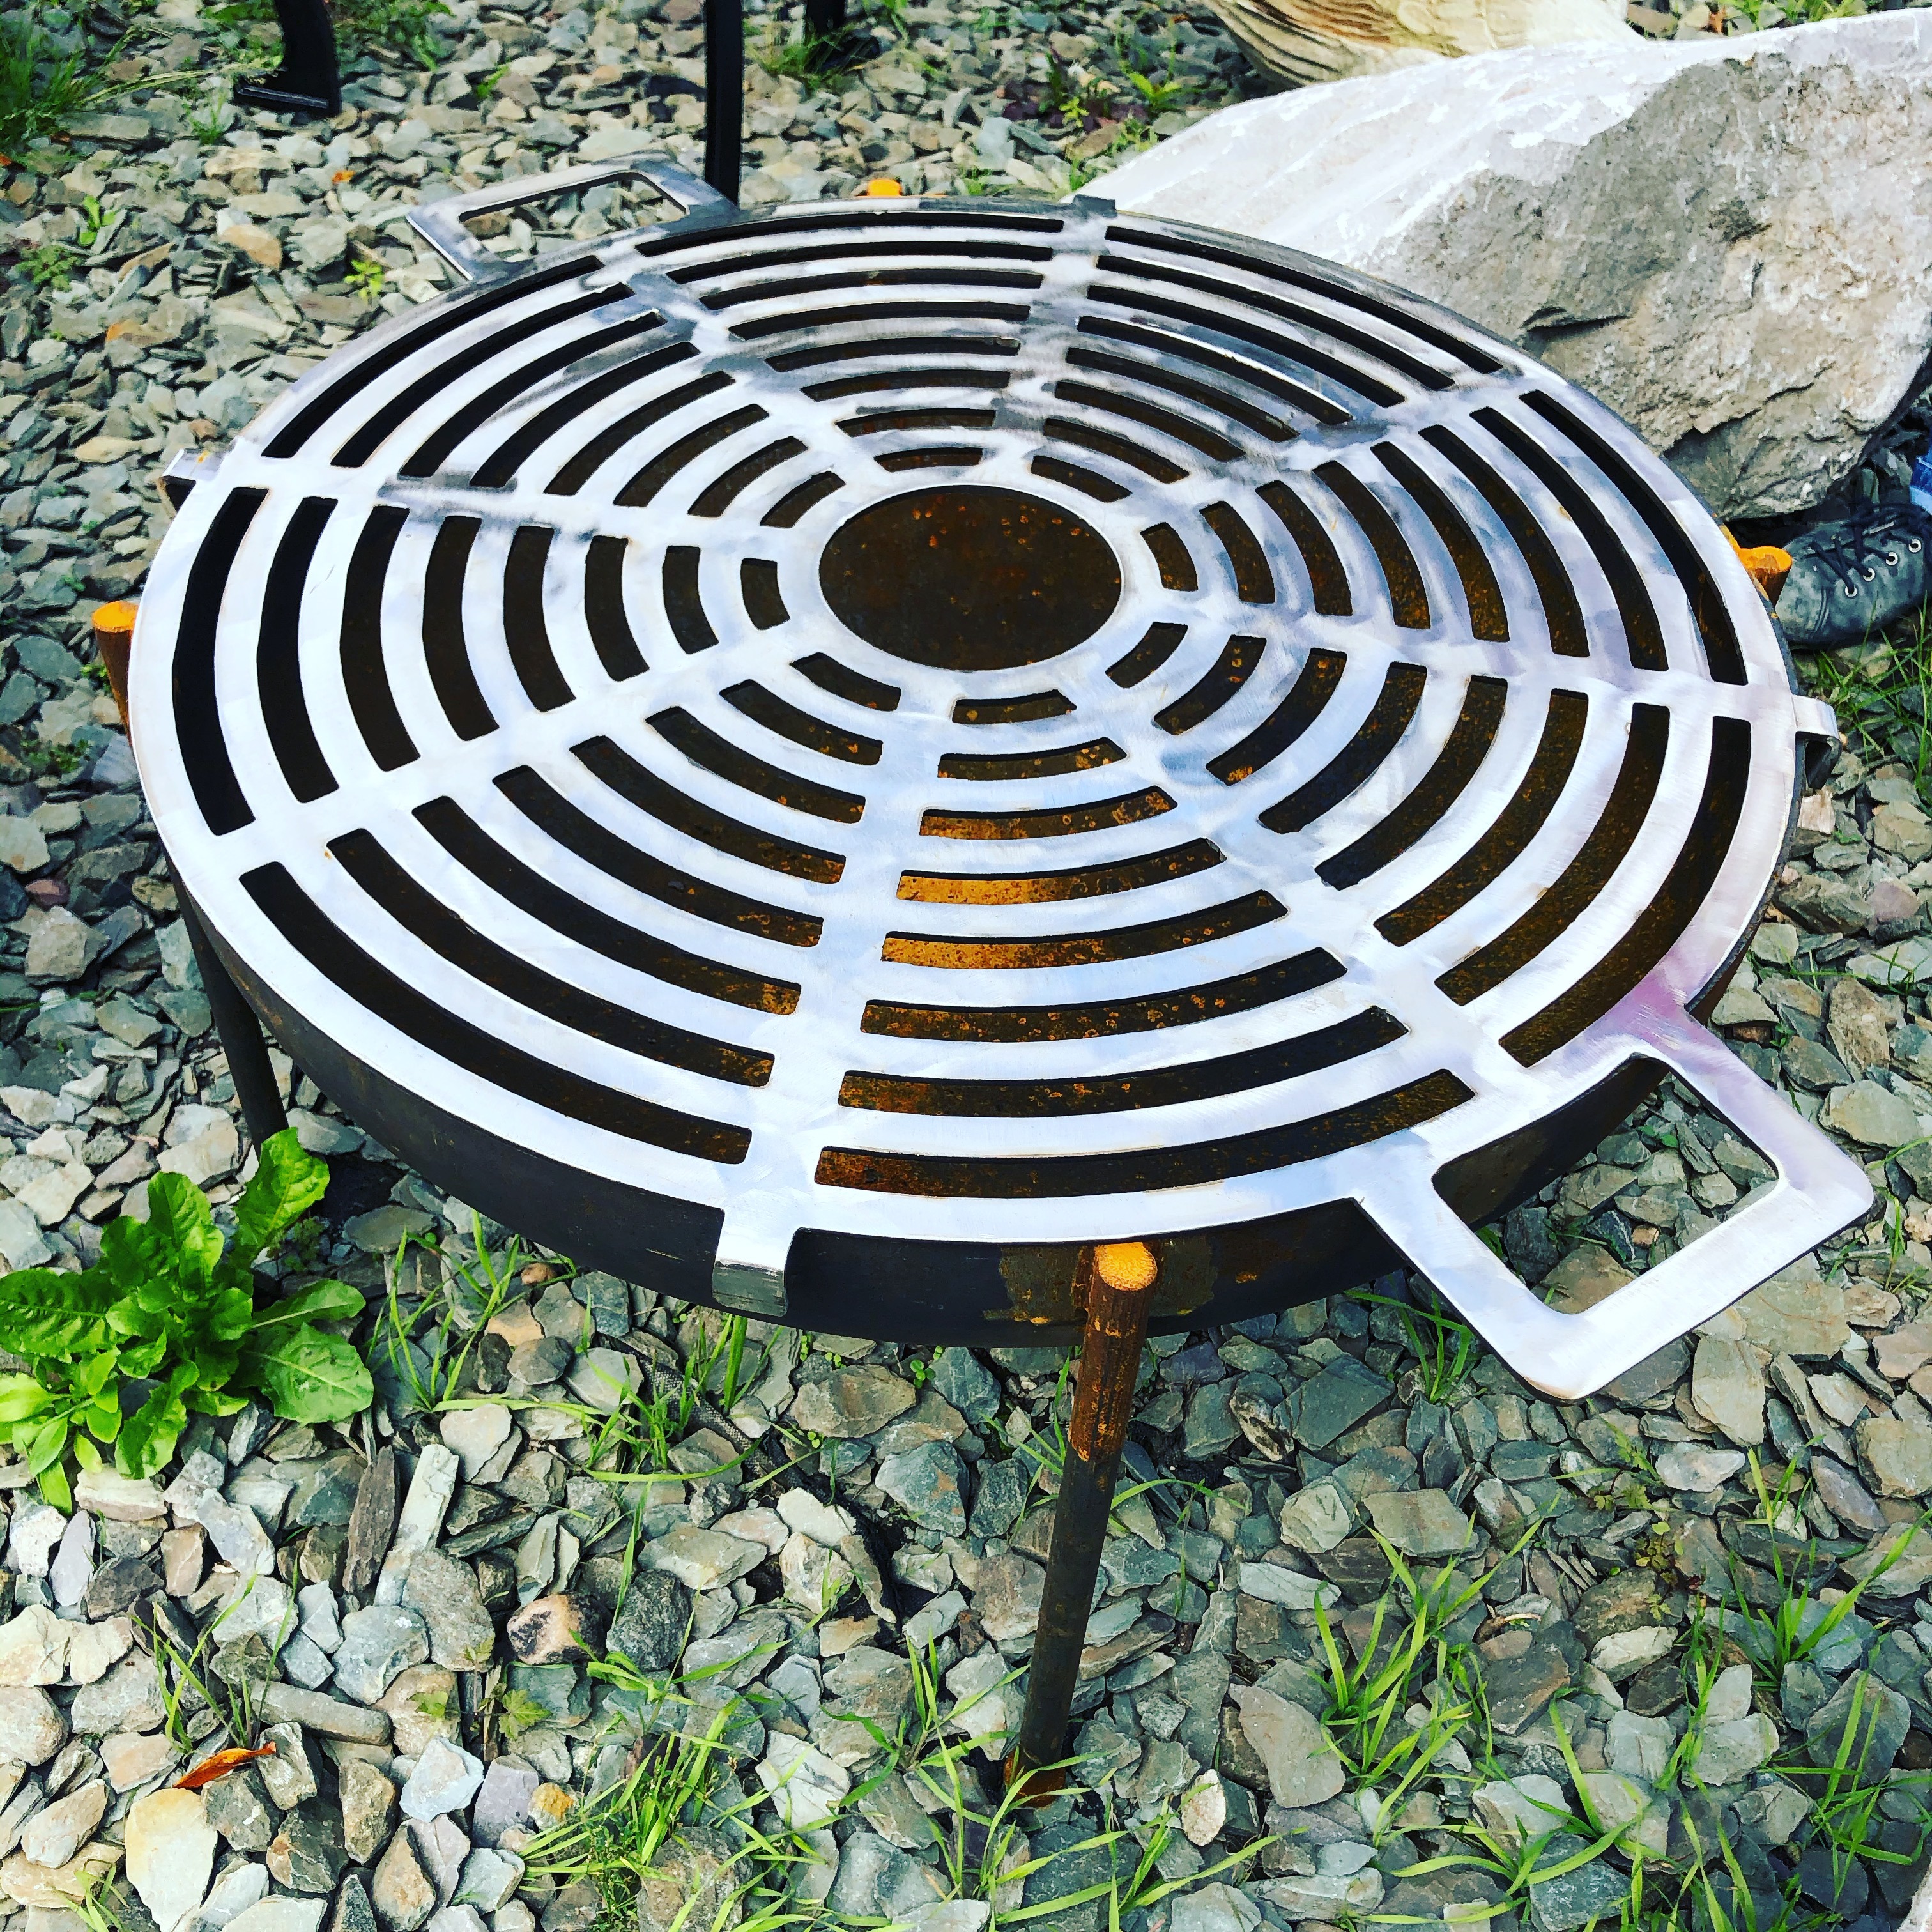 Stainless Steel Cooking Grill, How To Make A Fire Pit Cooking Grate